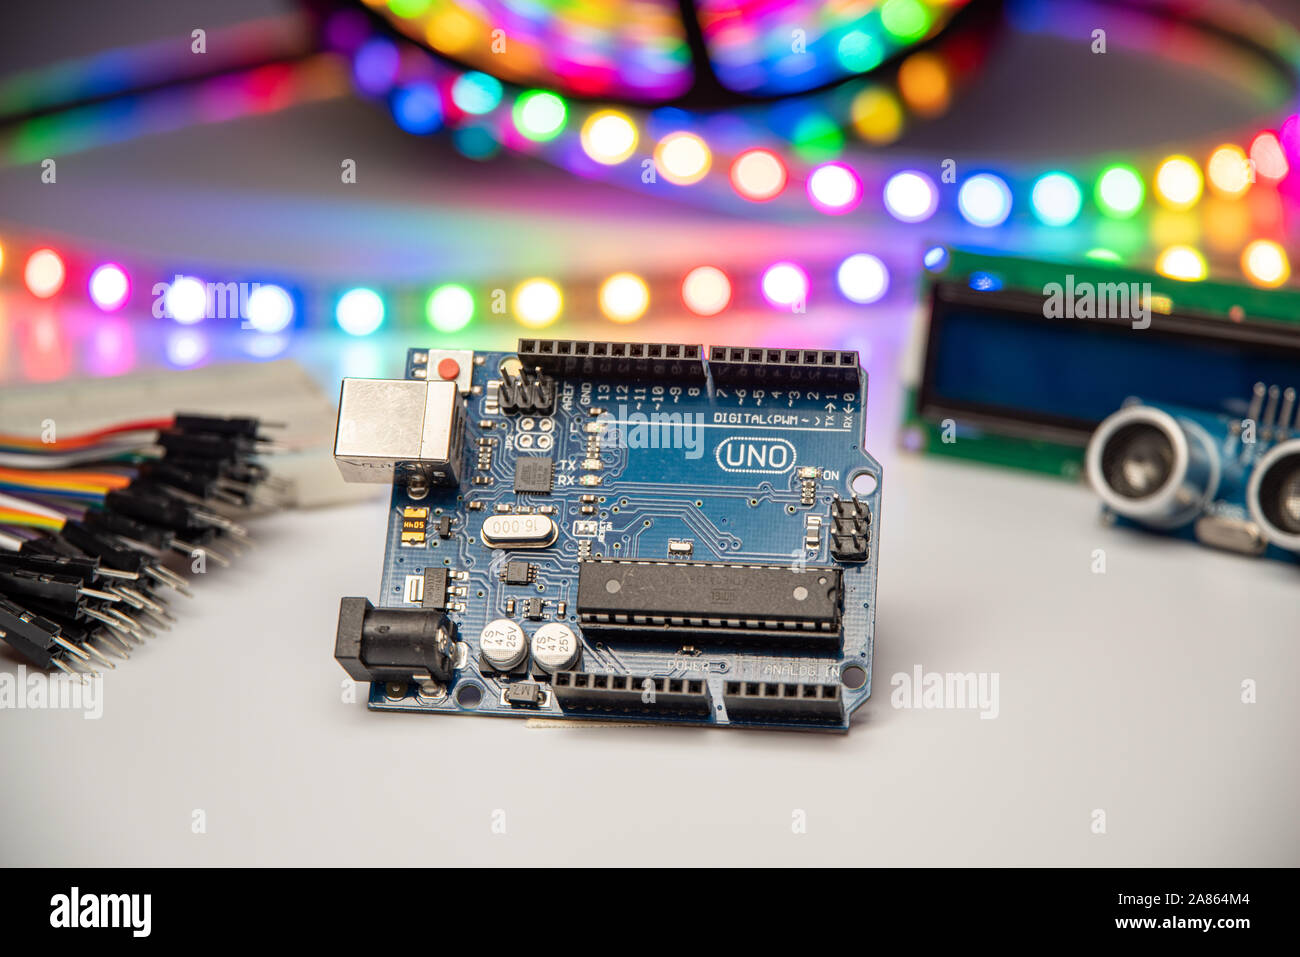 Arduino Uno displayed with LED strip, jumper wires, breadboard, LCD display, and ultrasonic sensor. Stock Photo